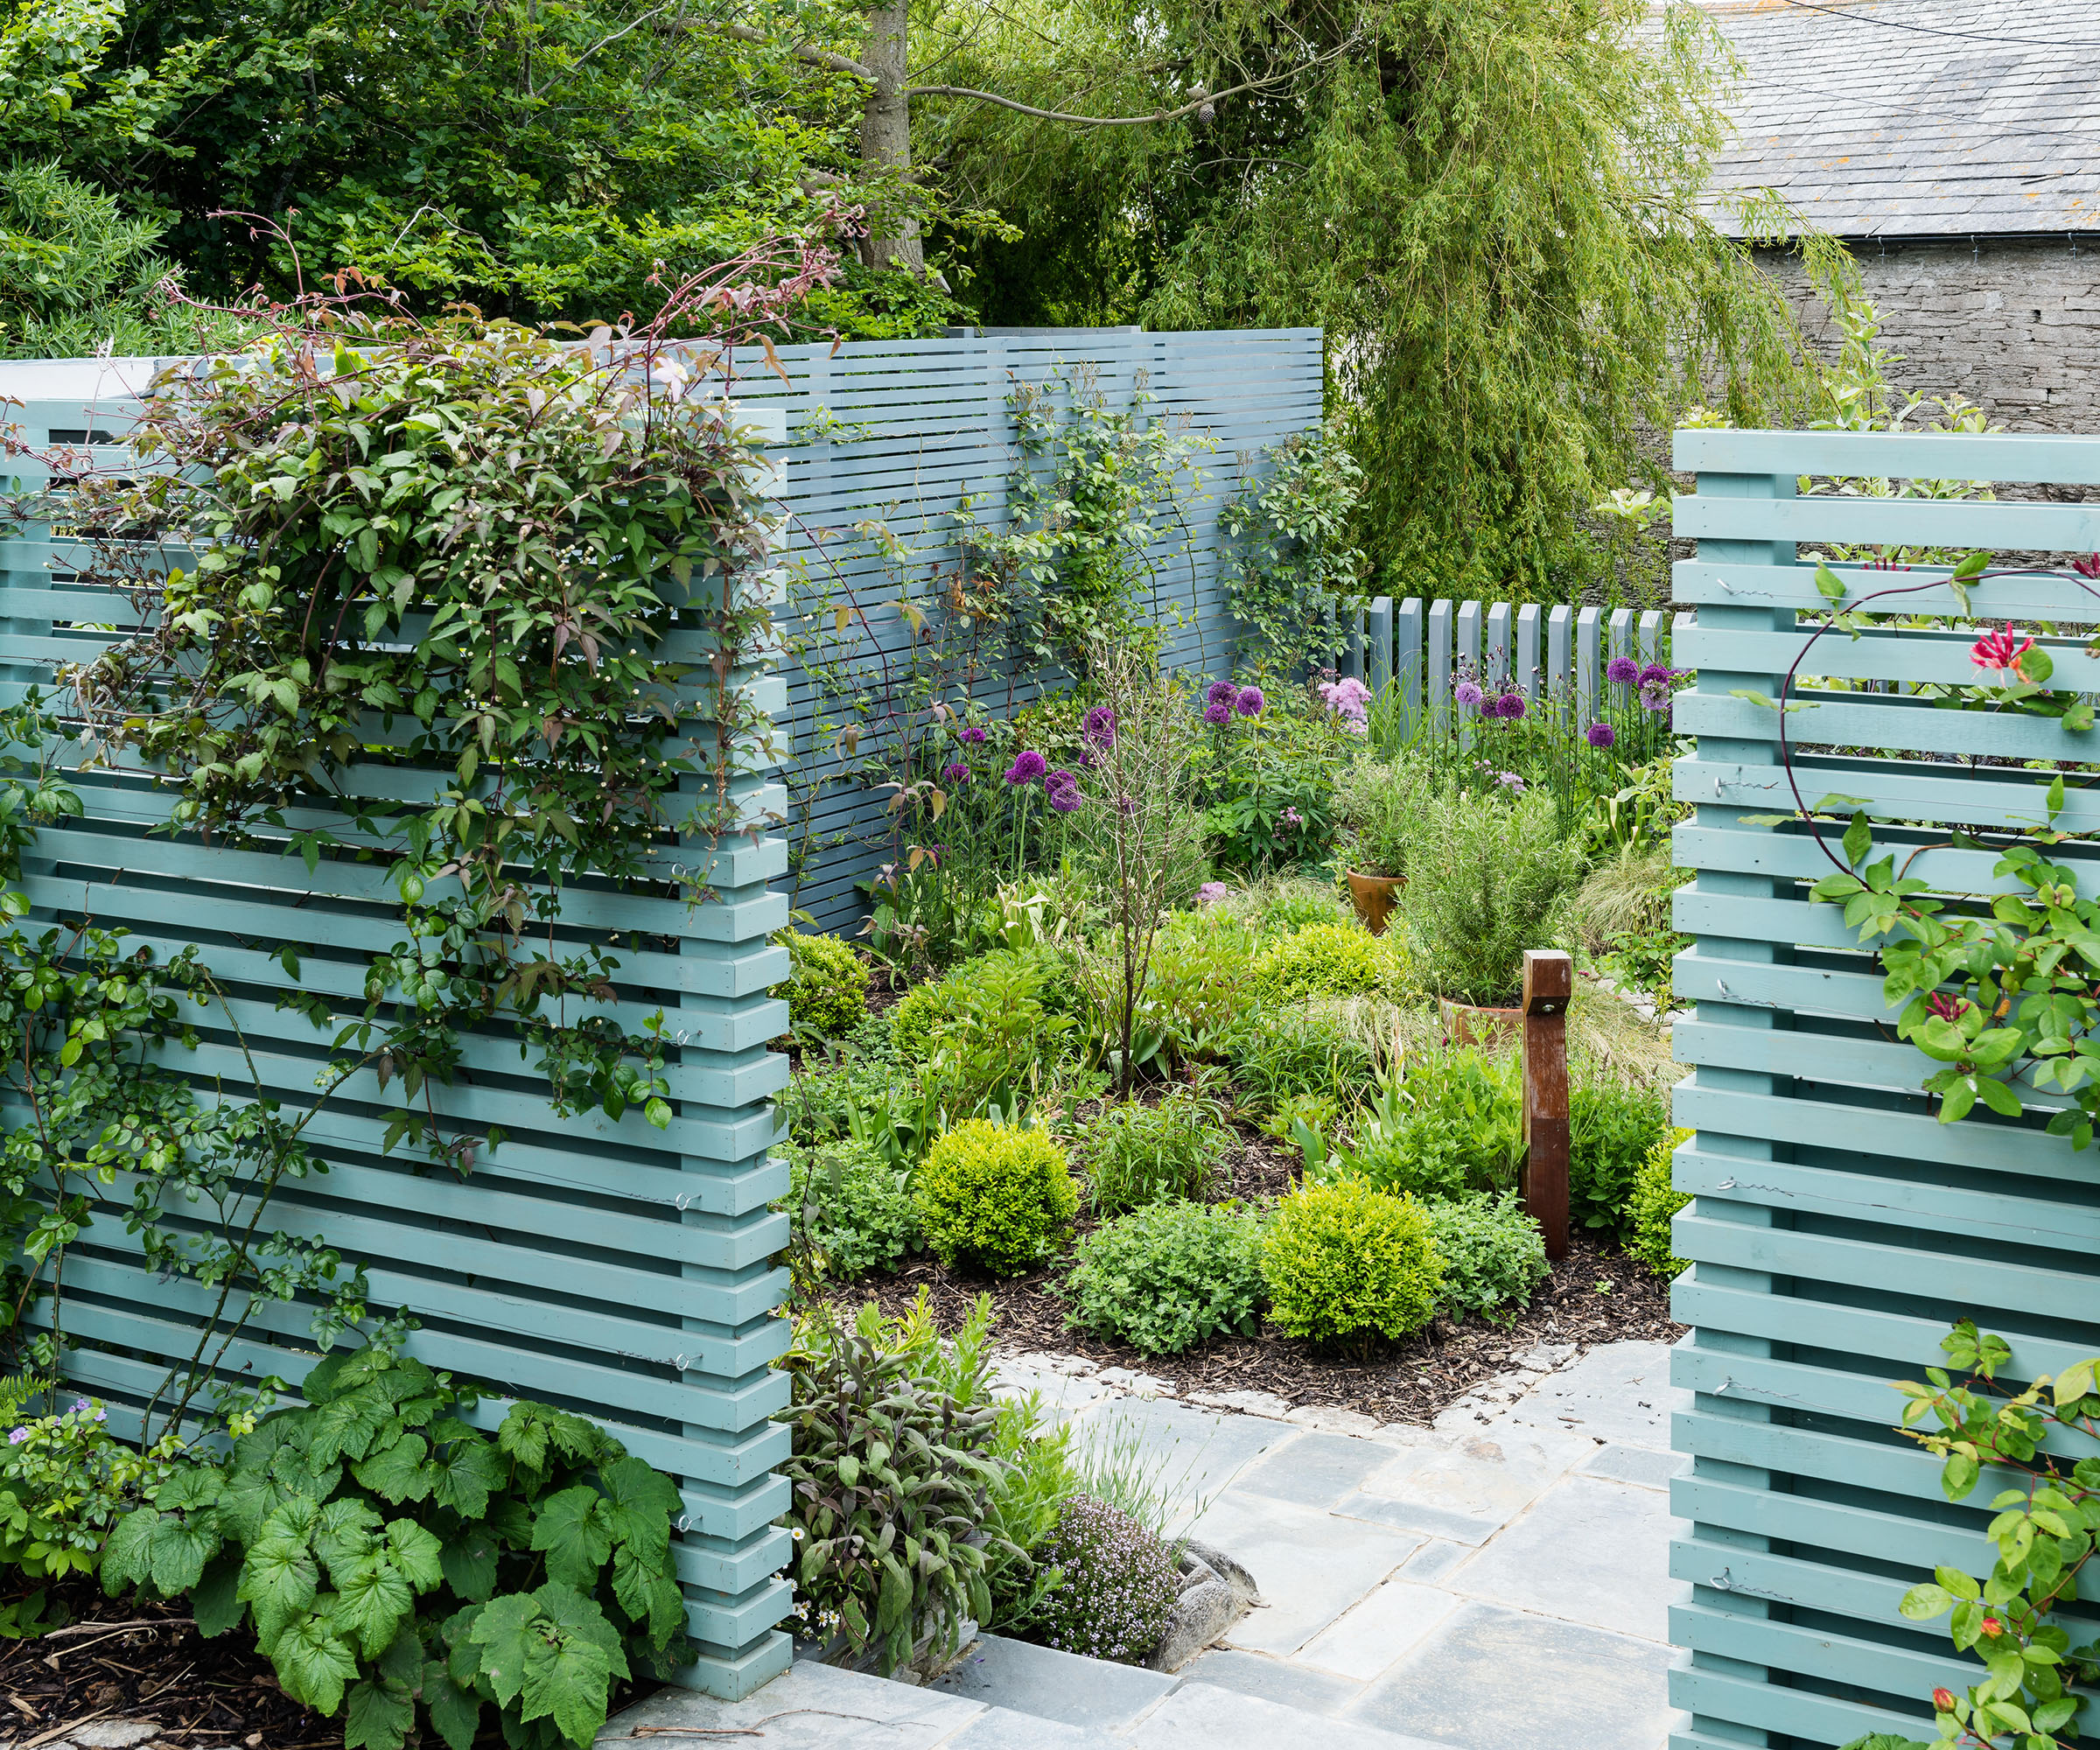 Courtyard garden with wooden slat screen painted in Pigeon from Farrow & Ball